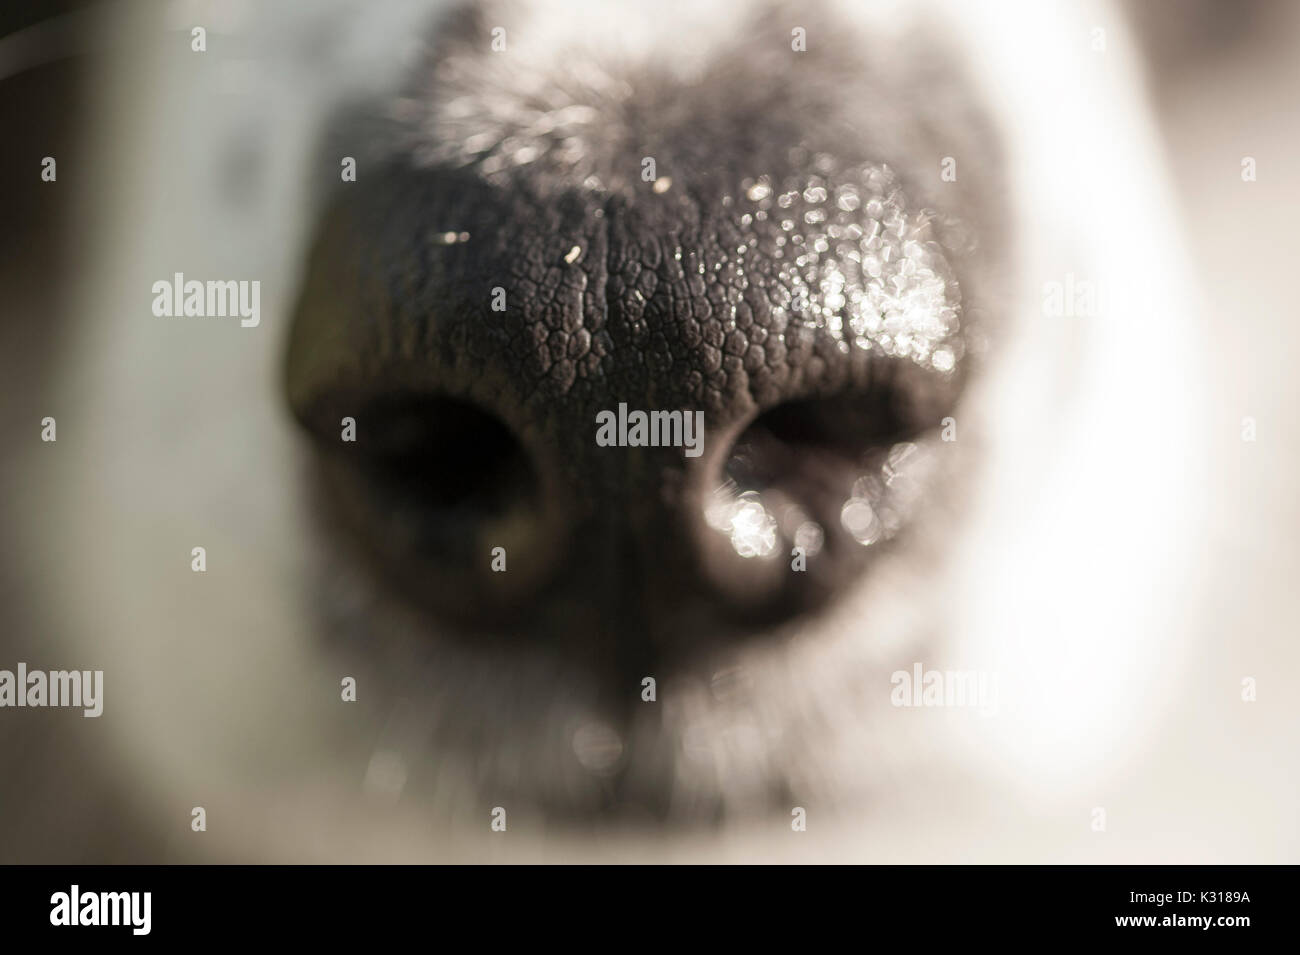 Close up view of a dog's wet nose in sunlight. Bits of plant matter visible on the nose pad. Stock Photo